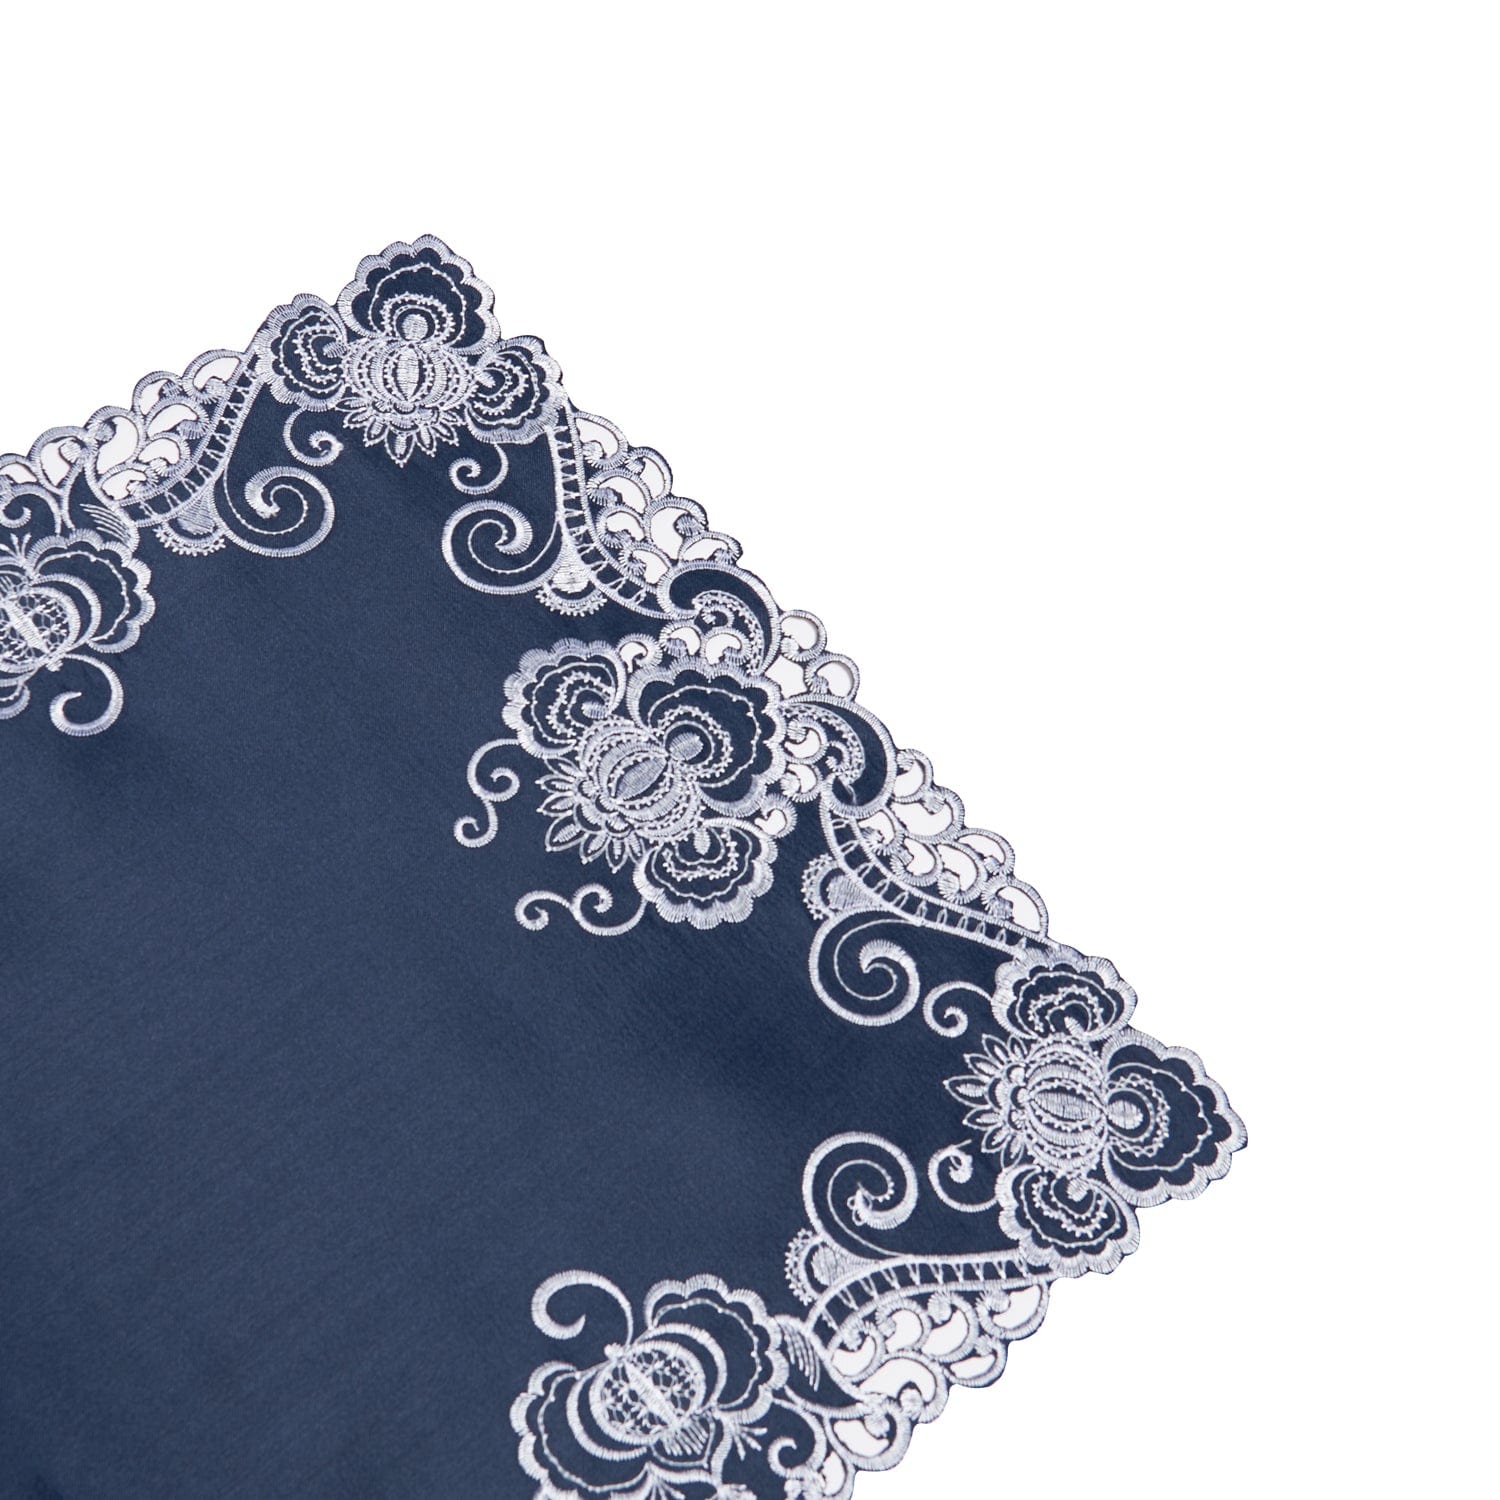 Paramount Midnight Blue Satin With White Embroidery Table Runner